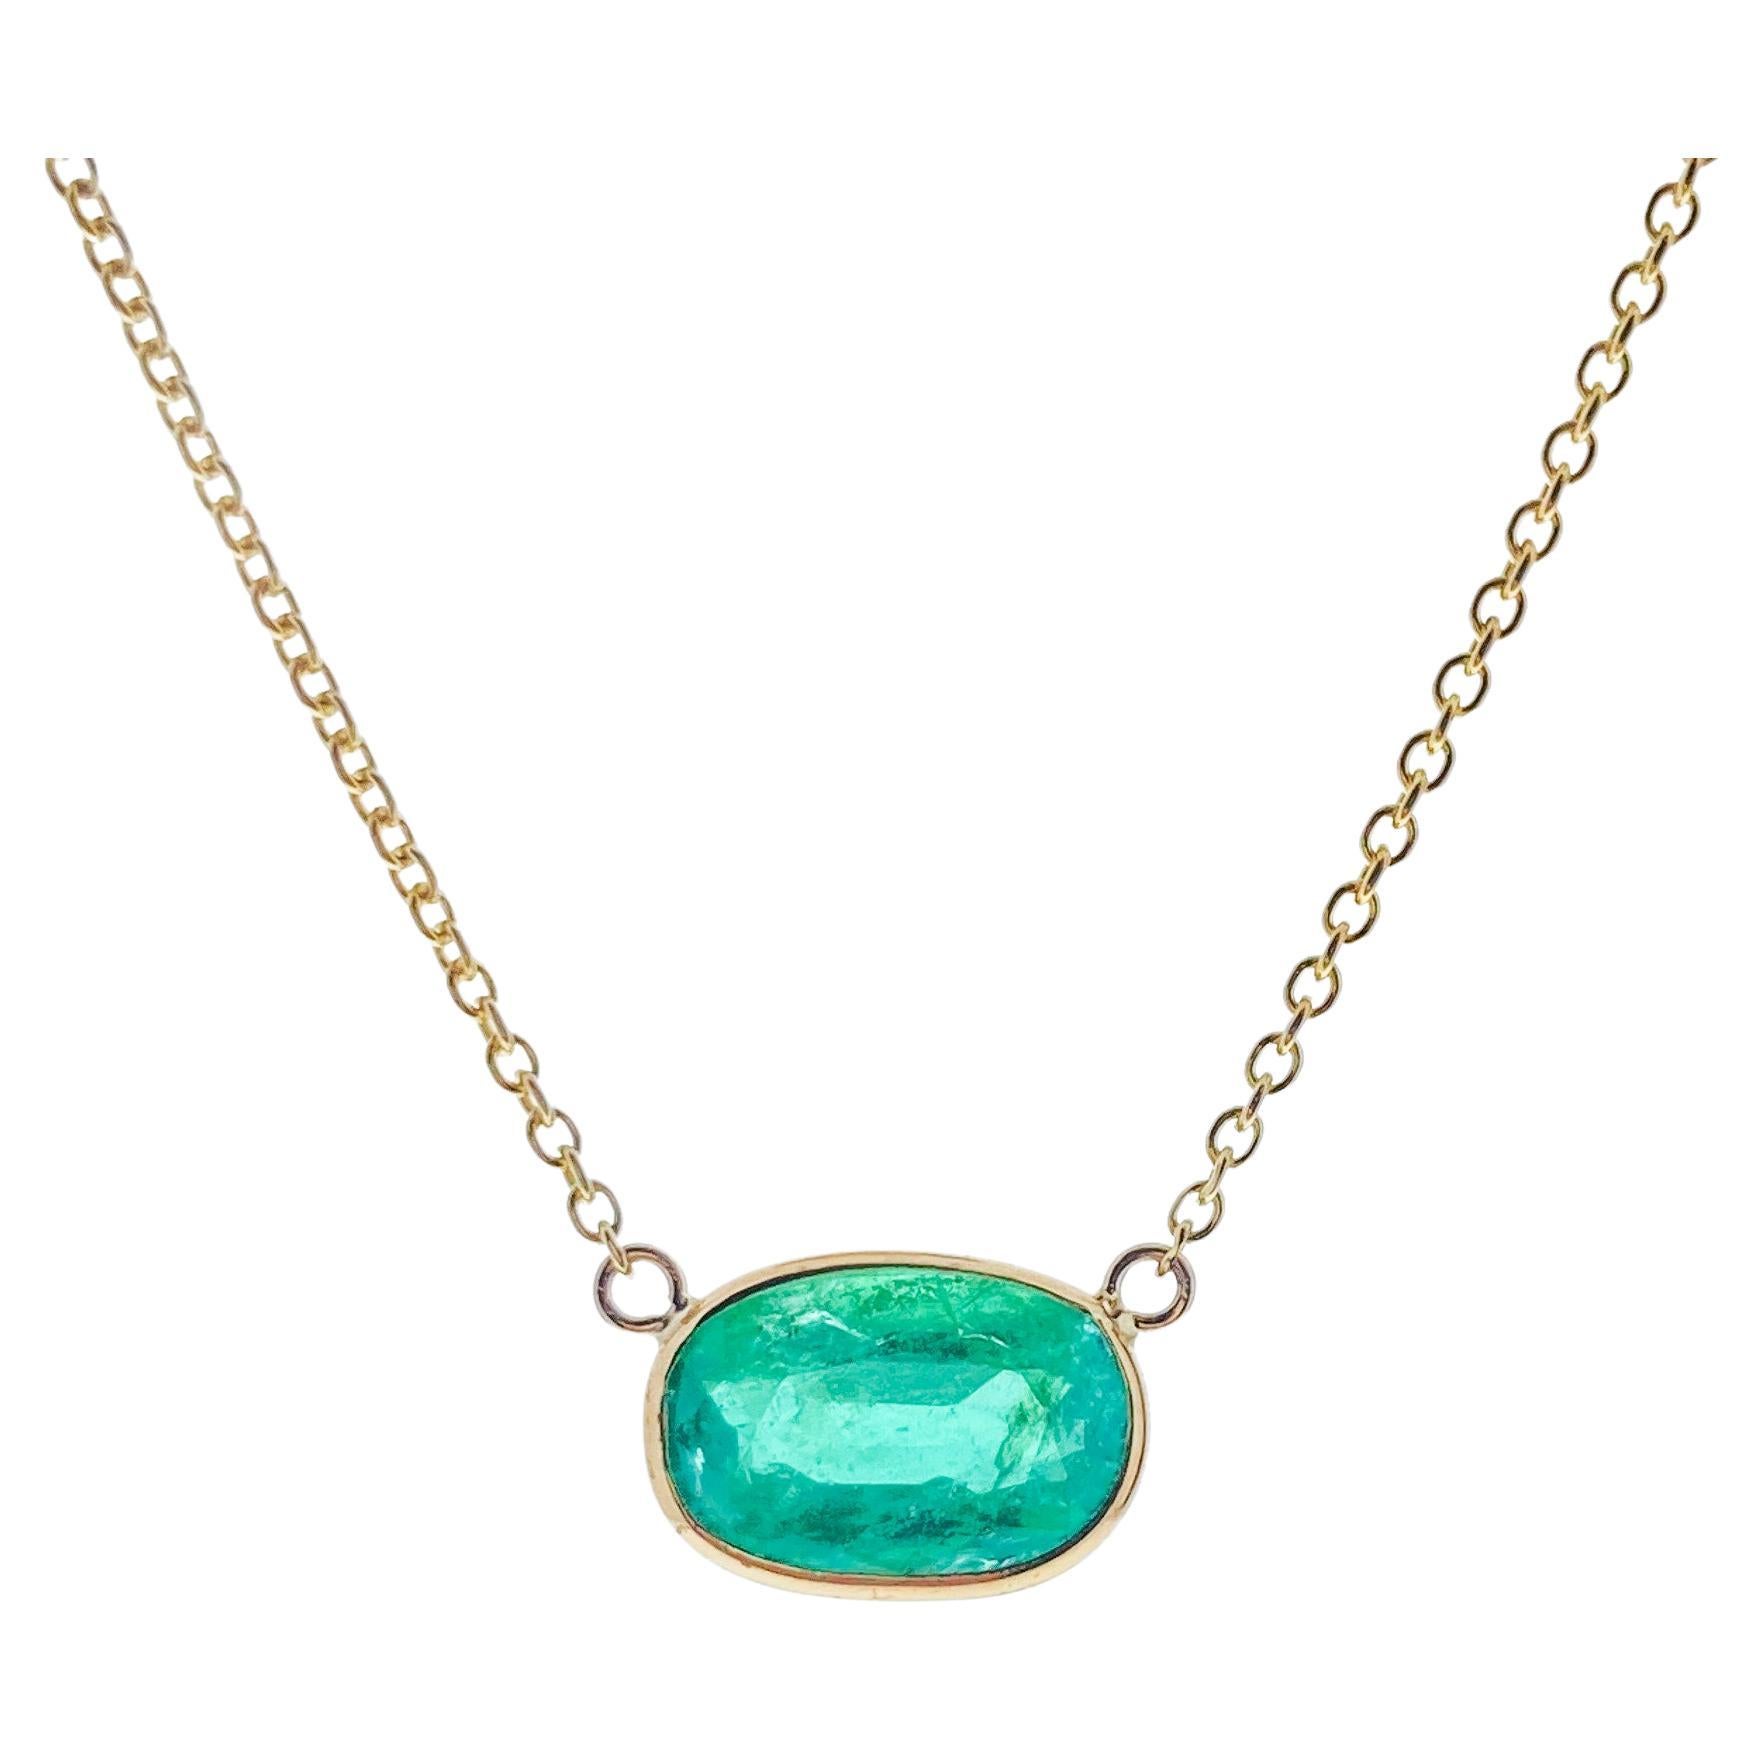 1.98 Carat Green Emerald Oval Cut Fashion Necklaces In 14K Yellow Gold For Sale